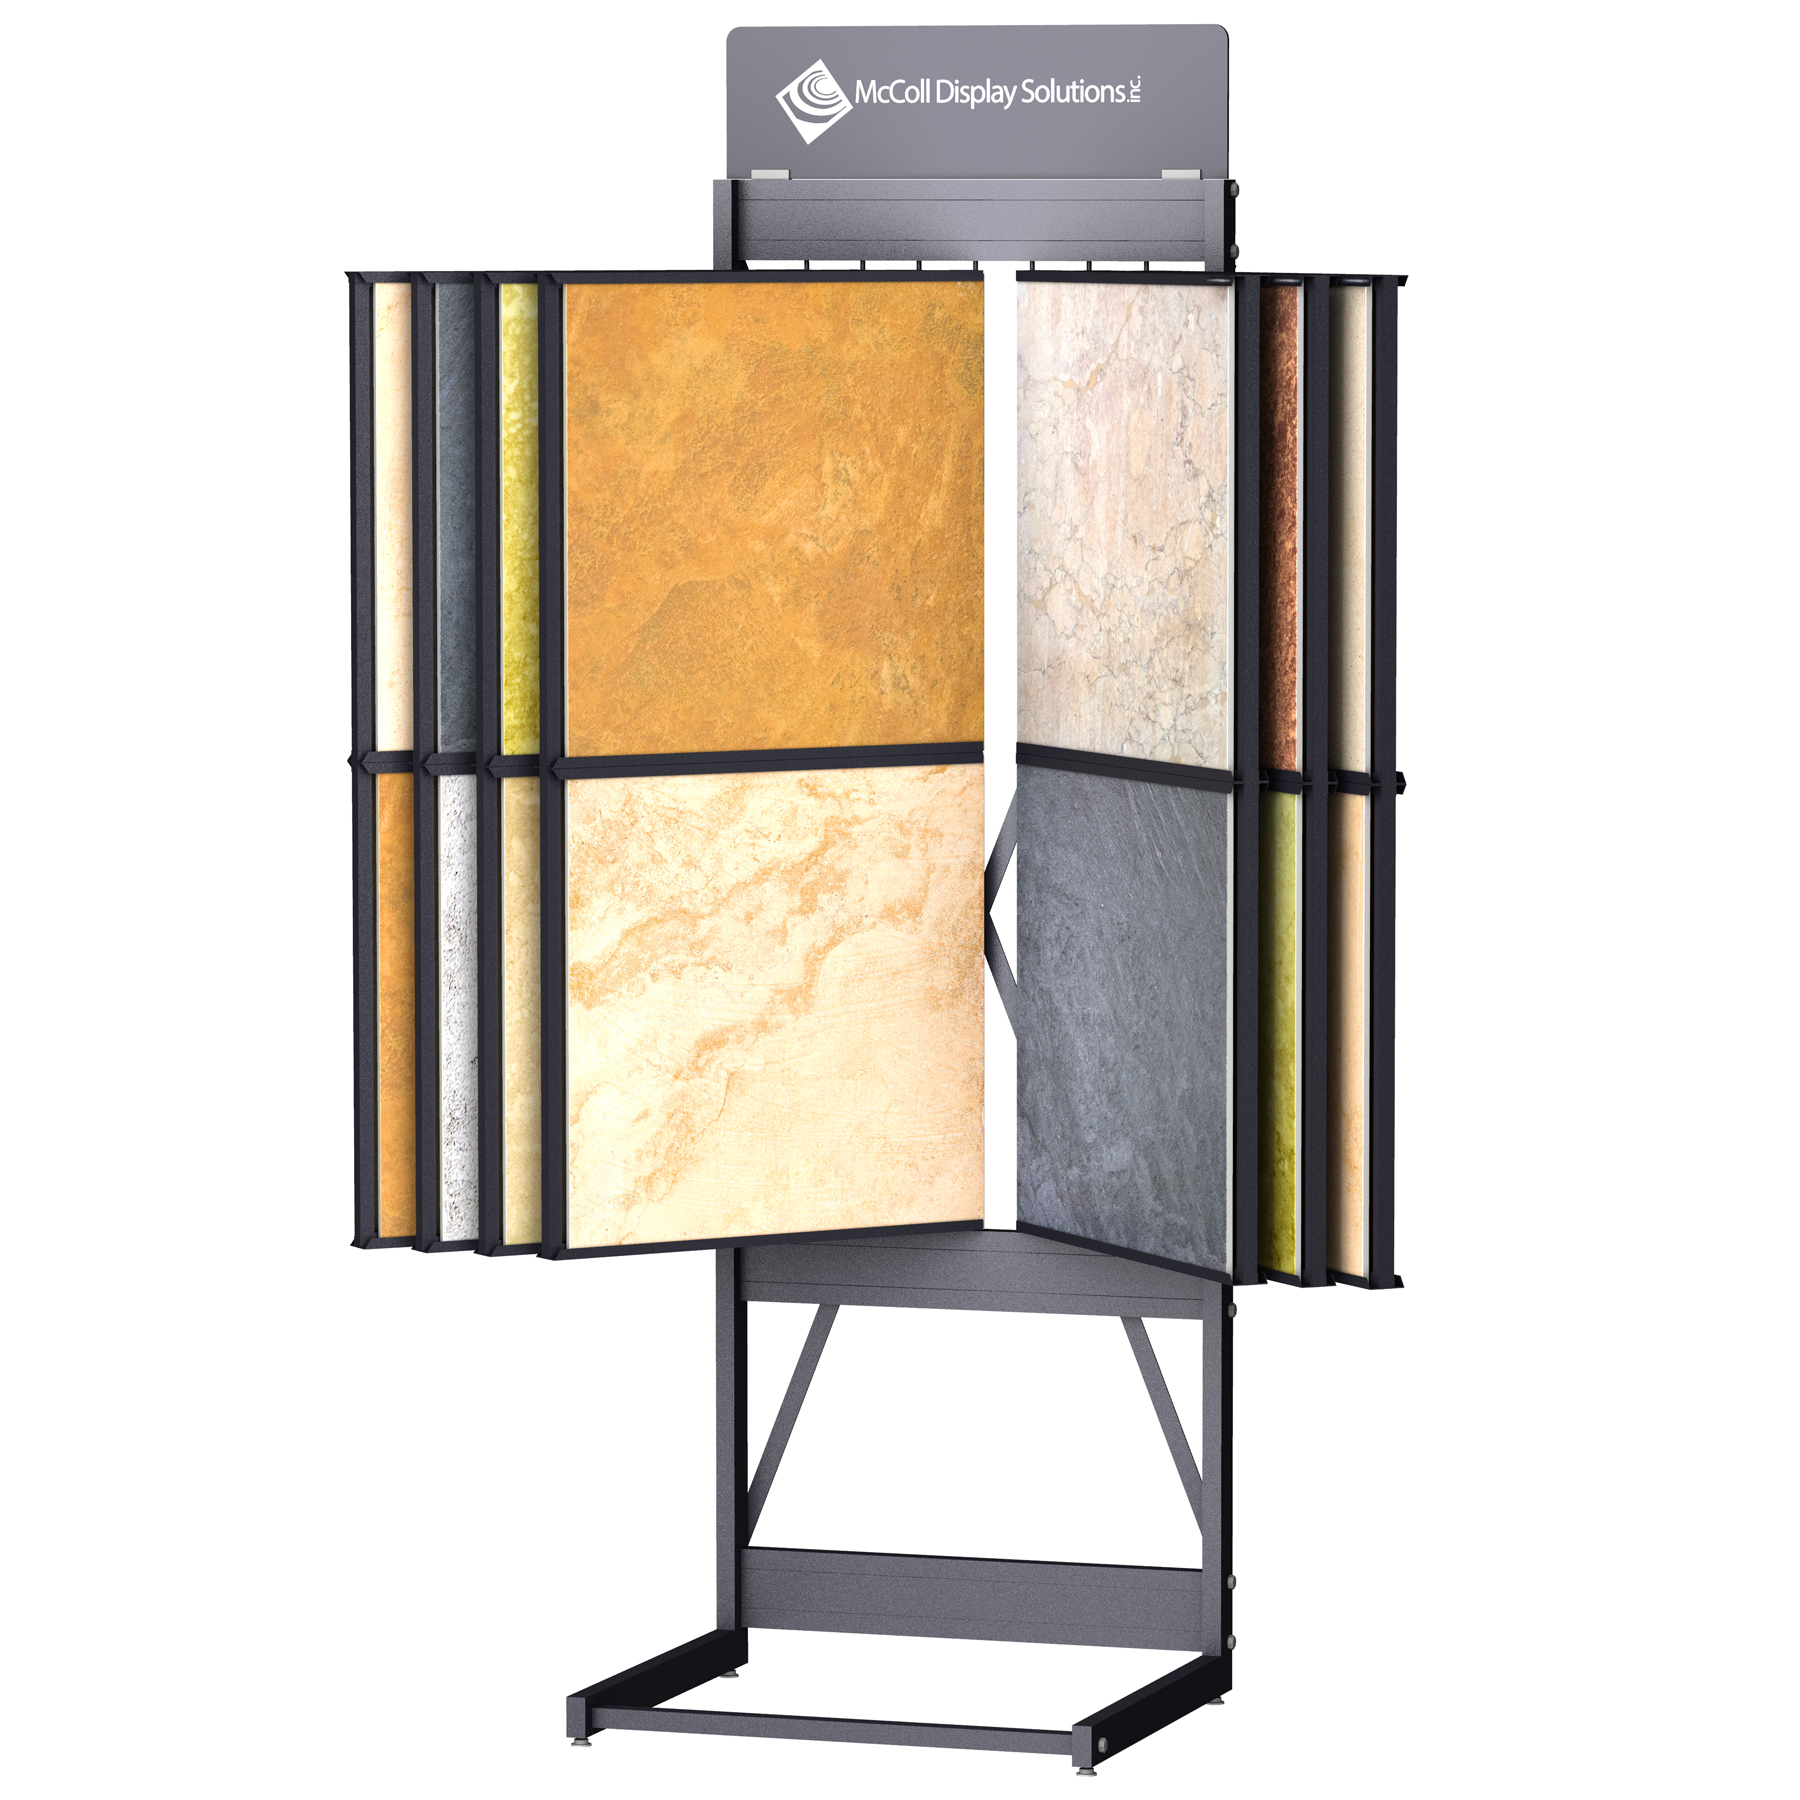 CD246 Wing Rack Tower Stand Channel Sample Display System for Tile Stone Marble Quartz Granite and other Hard Surface Samples